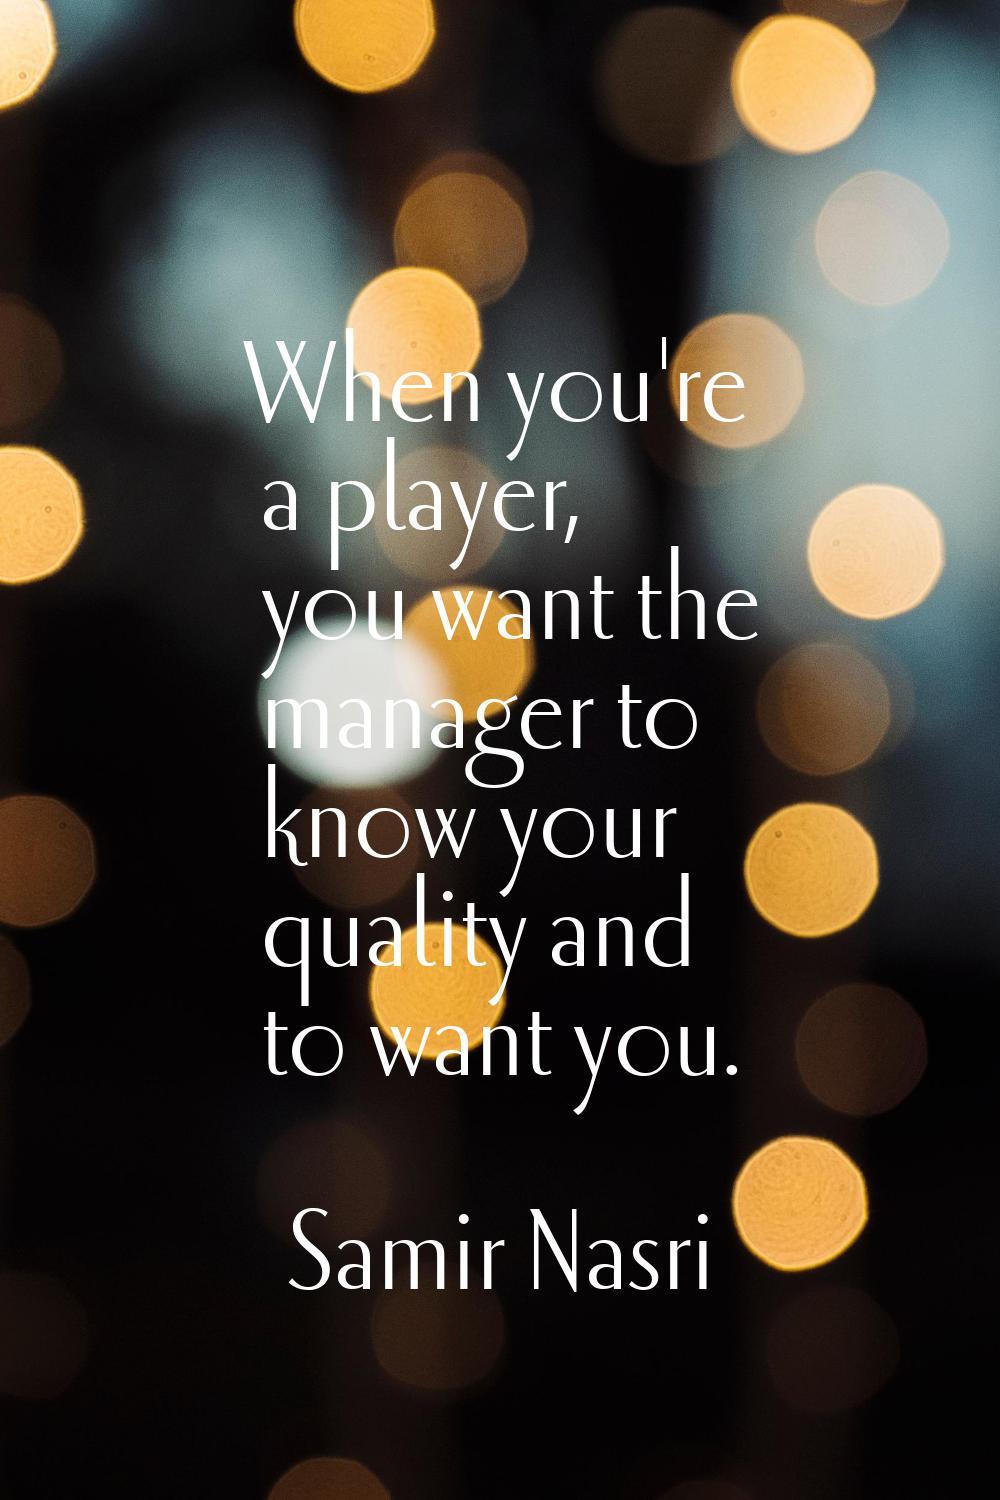 When you're a player, you want the manager to know your quality and to want you.